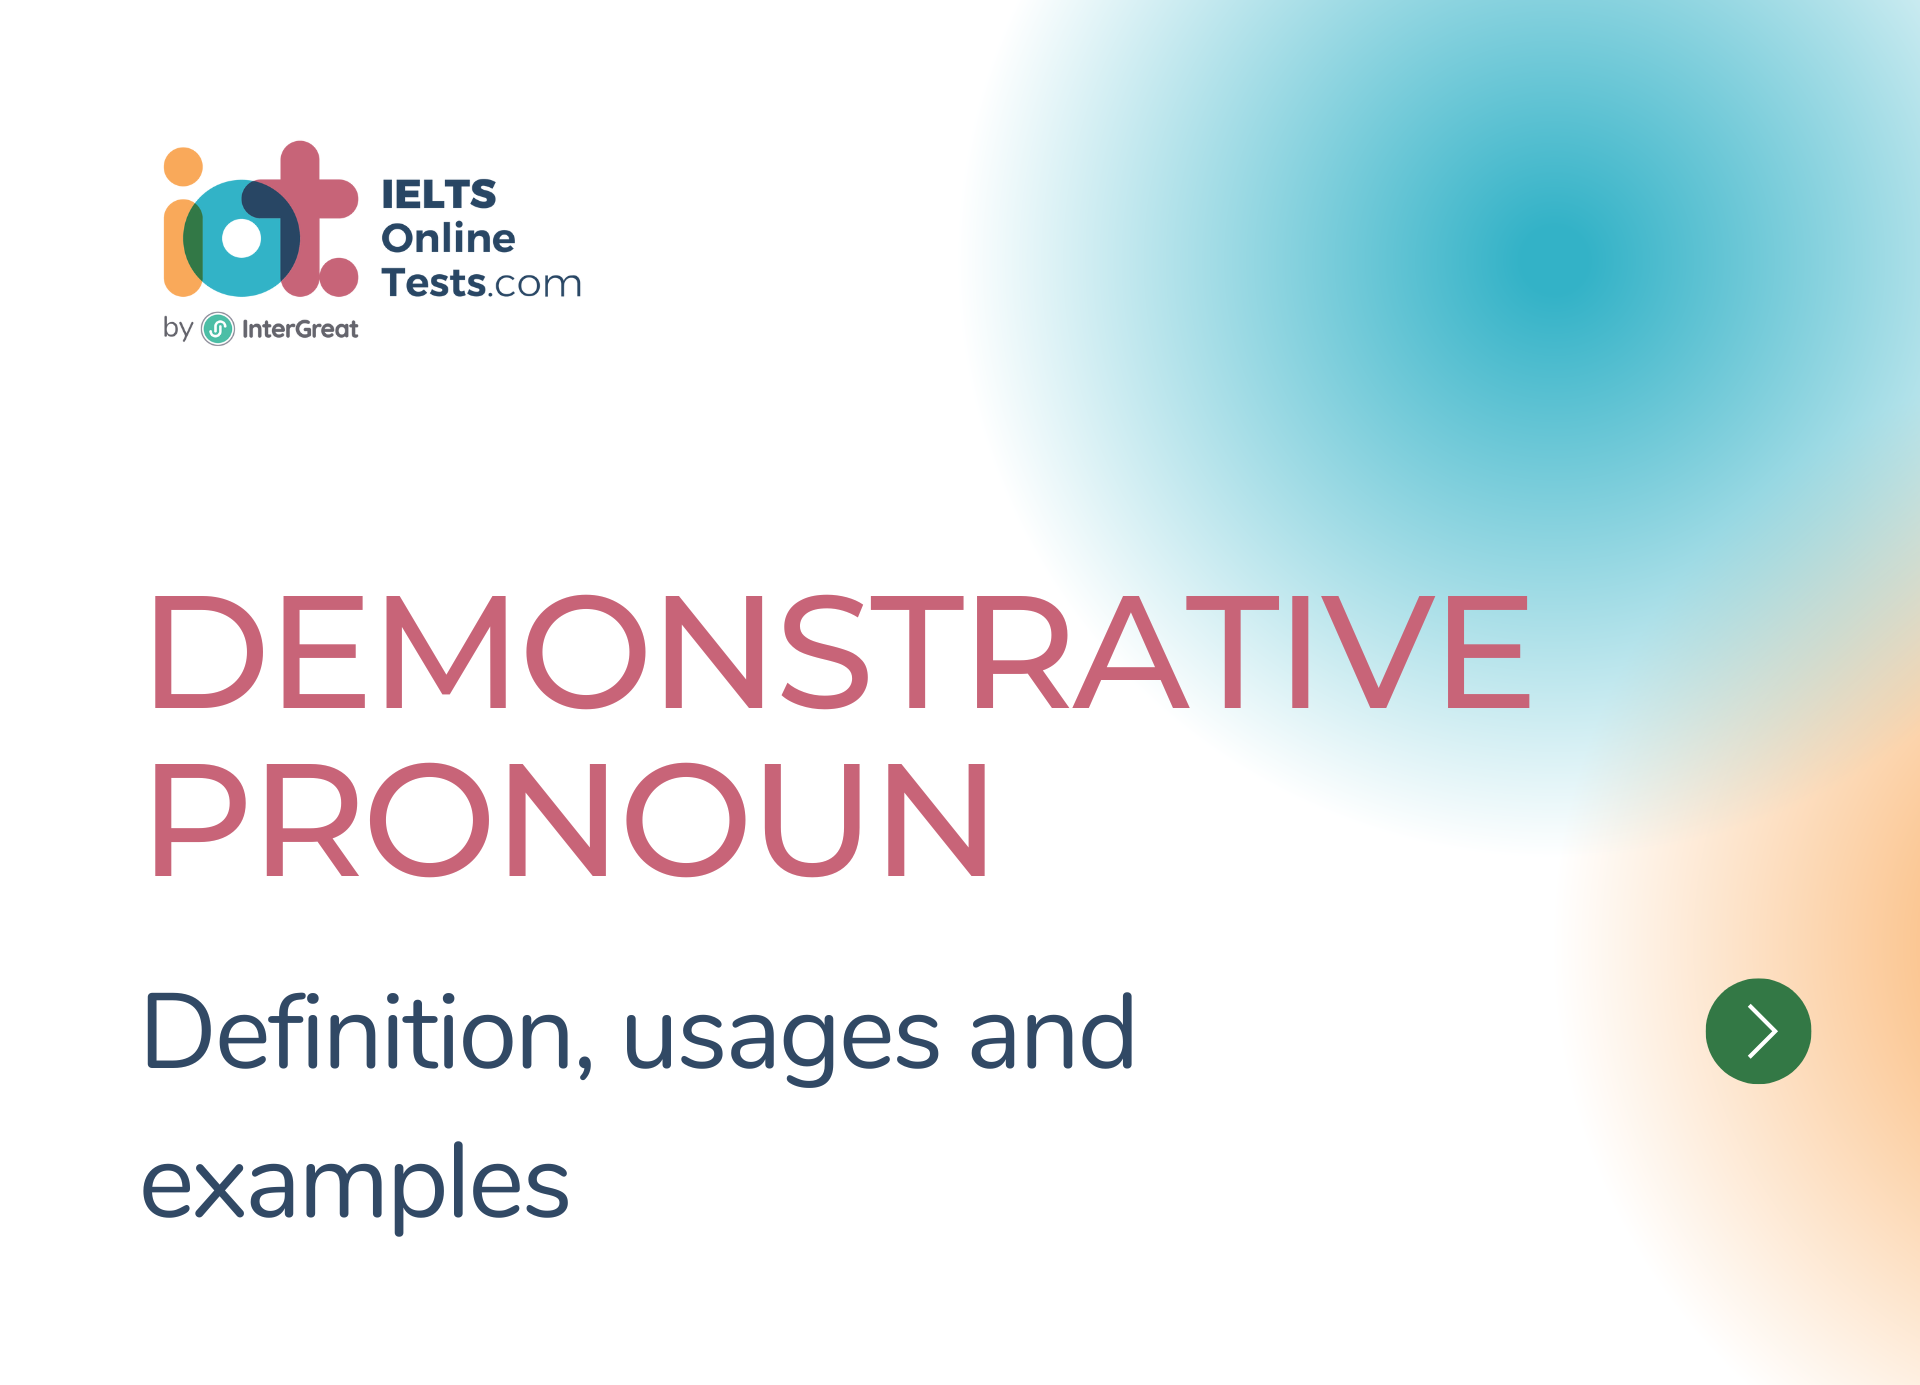 Demonstrative pronoun definition and examples